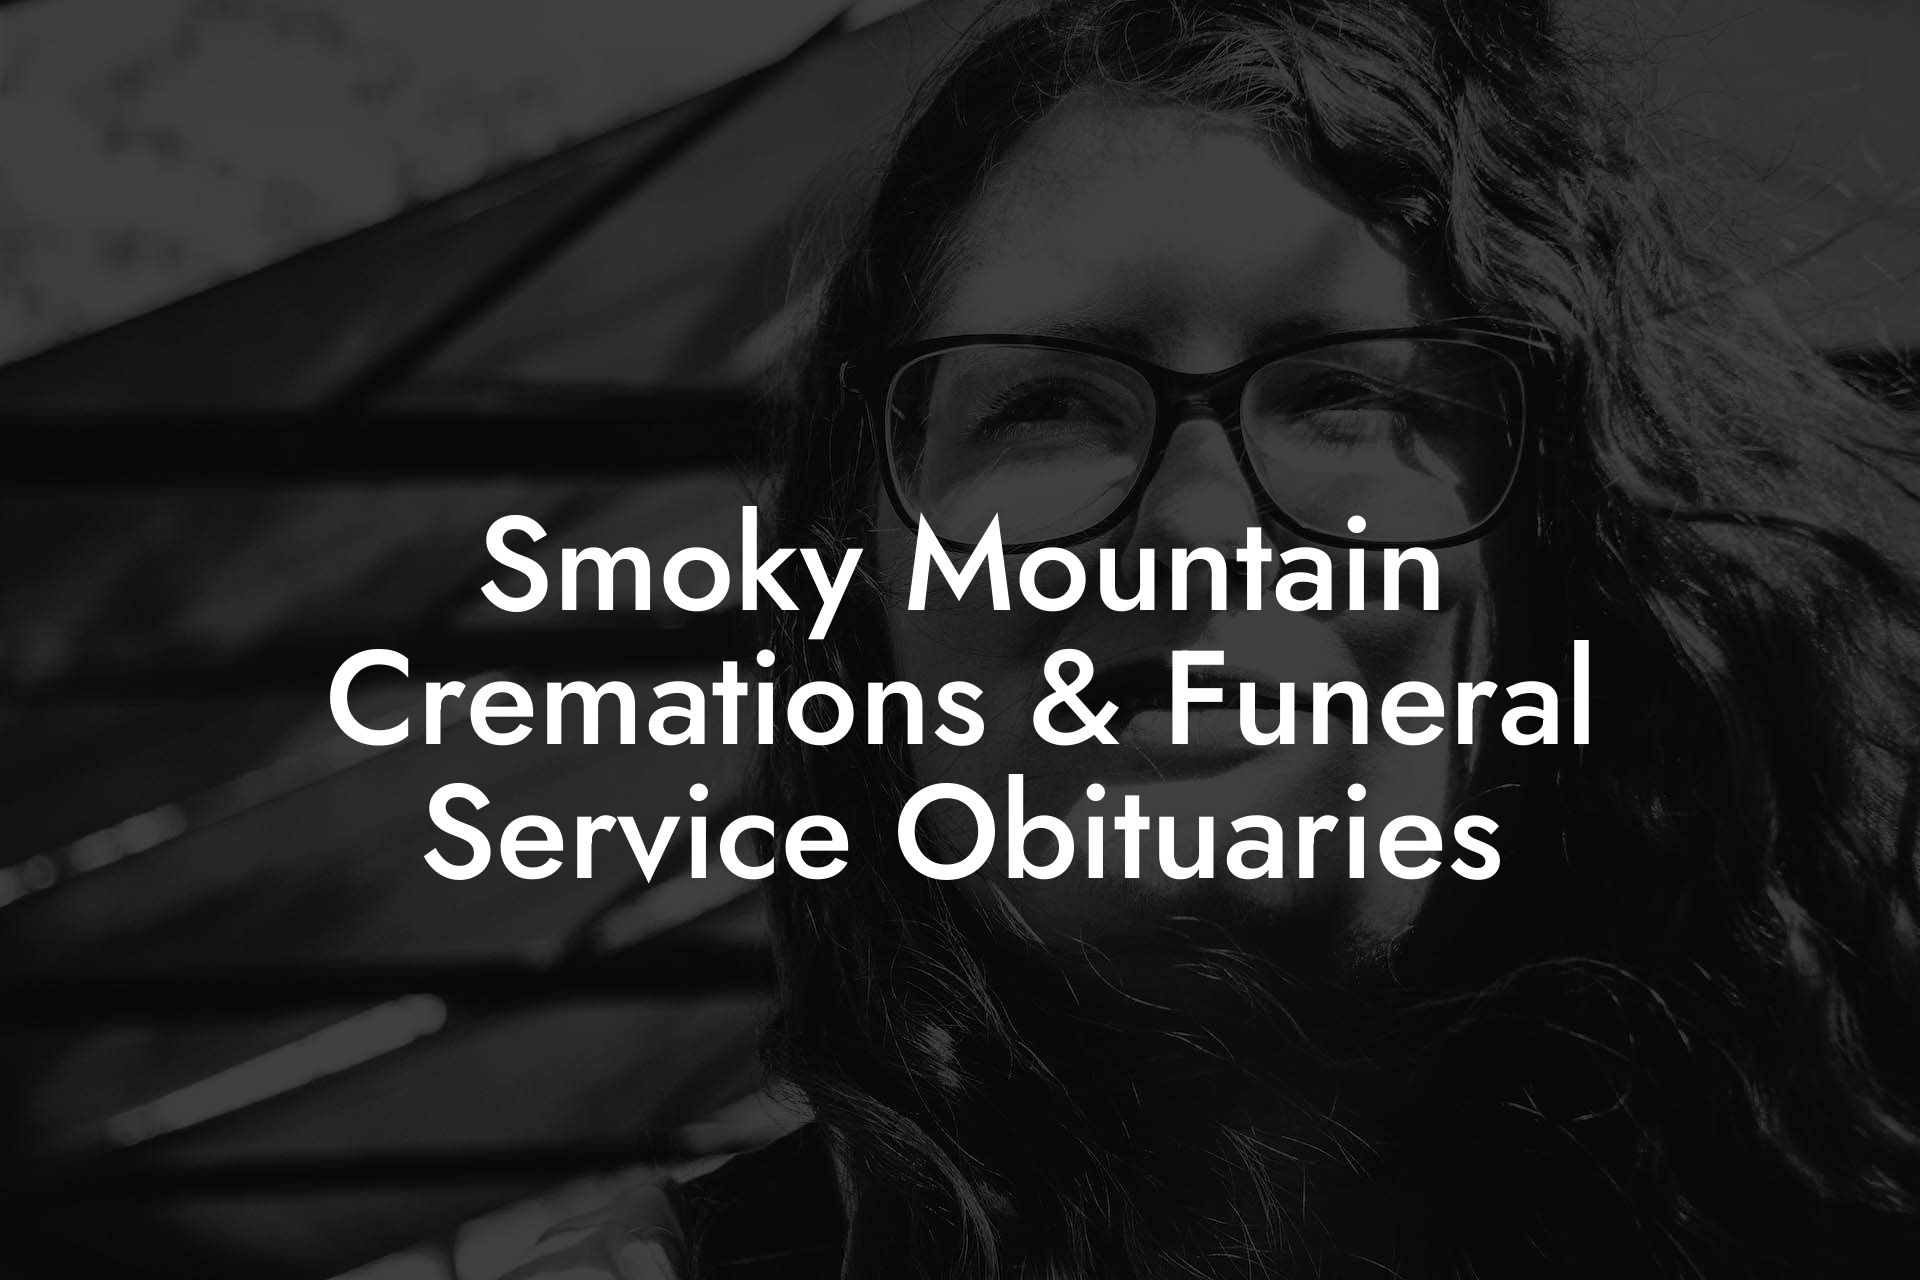 Smoky Mountain Cremations & Funeral Service Obituaries